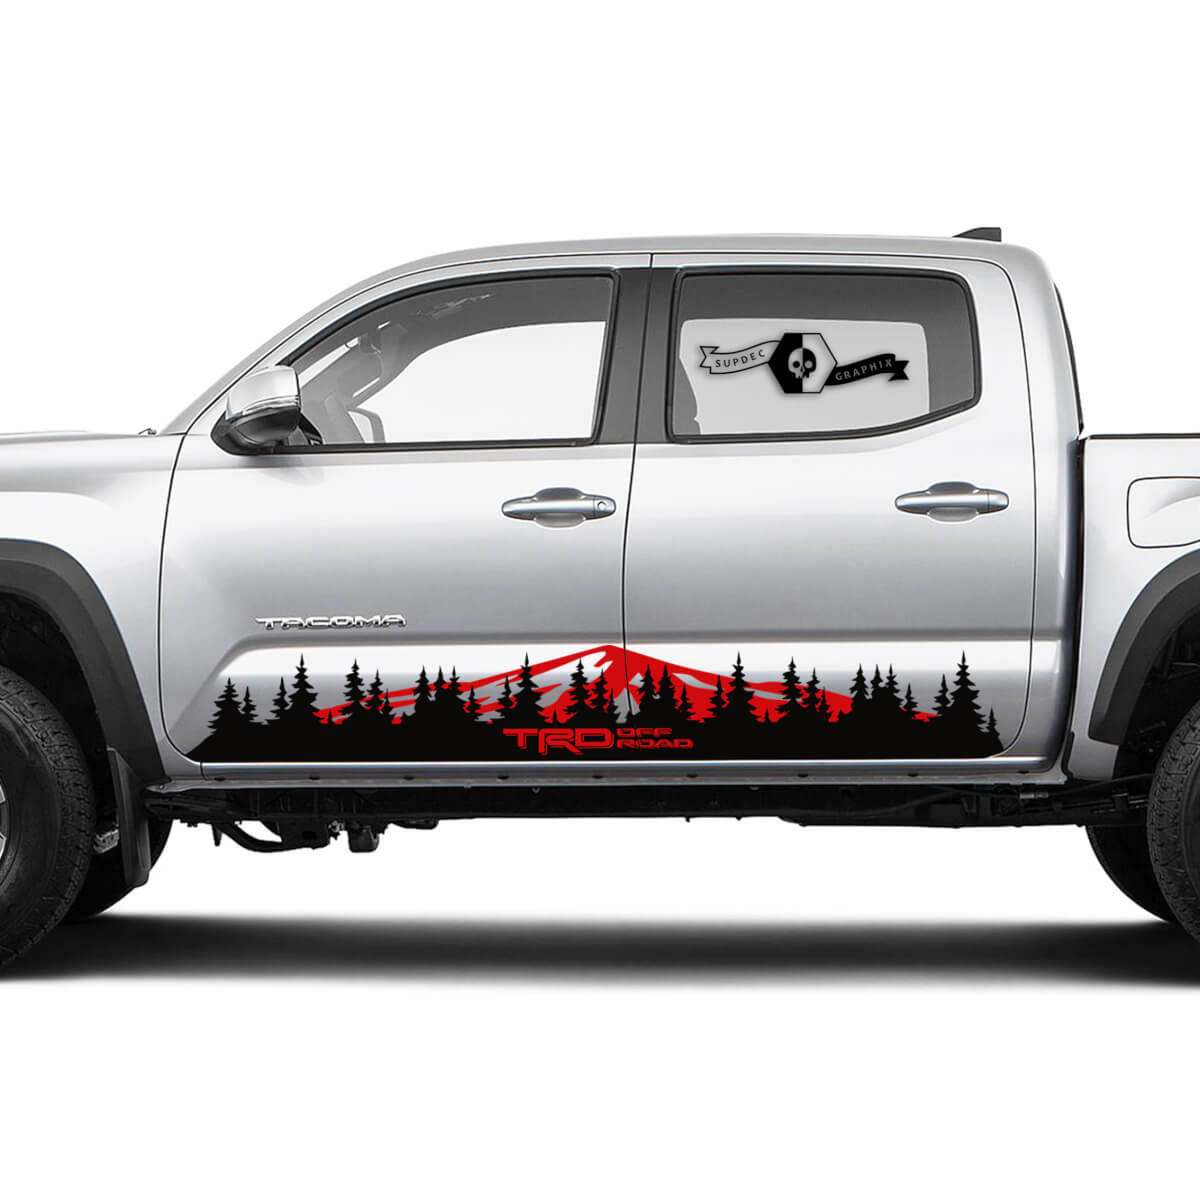 TRD TOYOTA Mountains and Fores Trees Decals Stickers for Tacoma Tundra 4Runner Hilux Rocker Panel